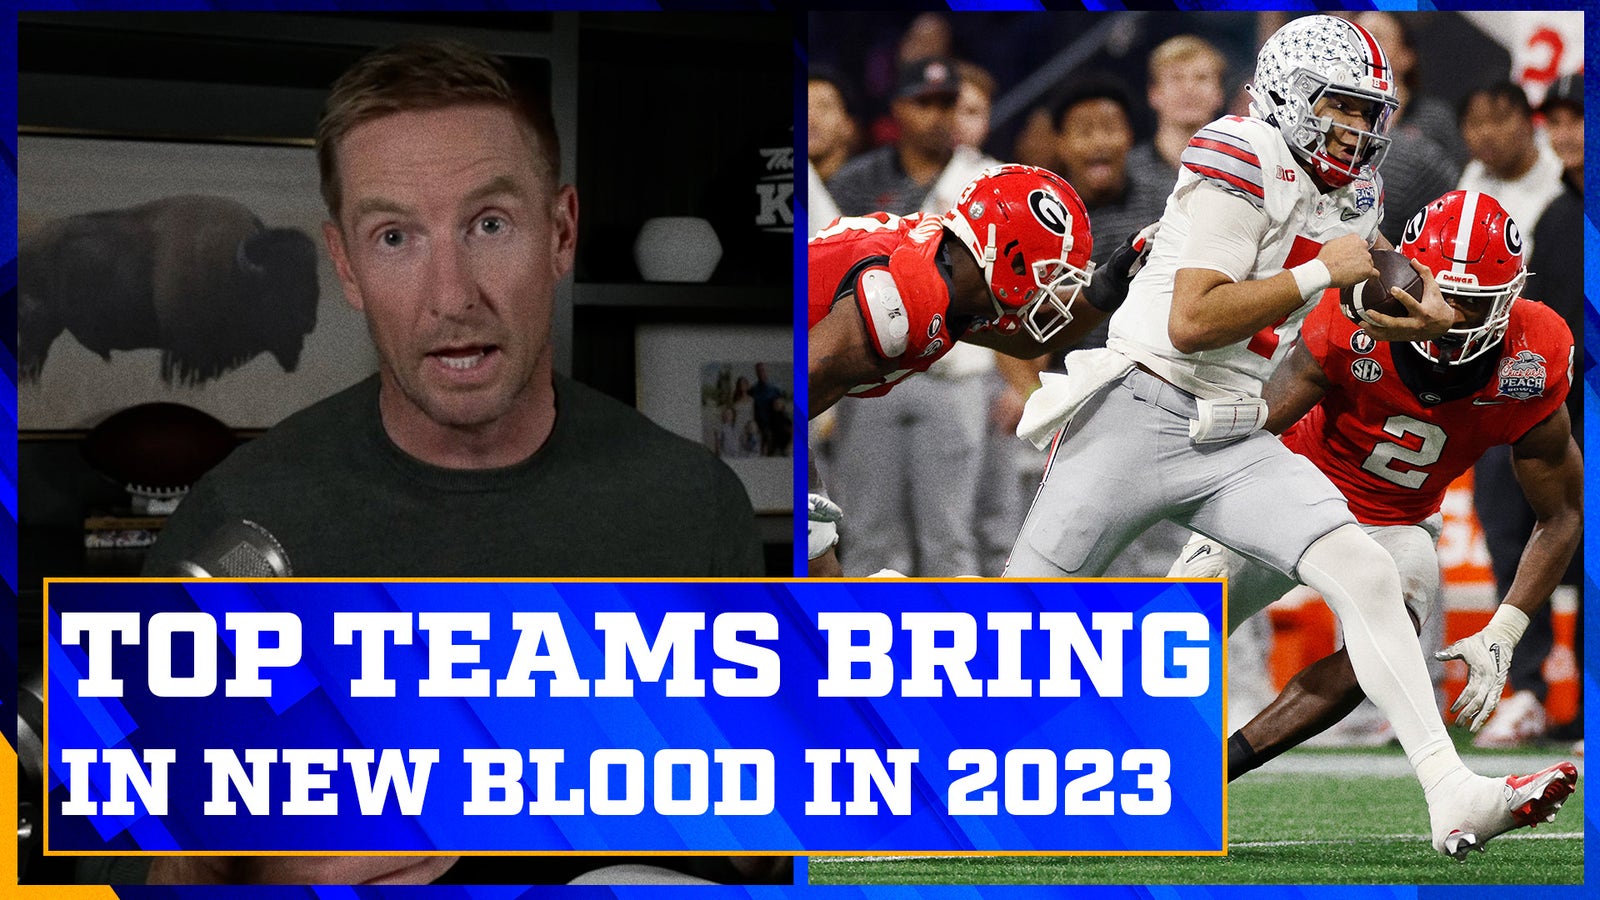 Ohio State brings in new blood in 2023 